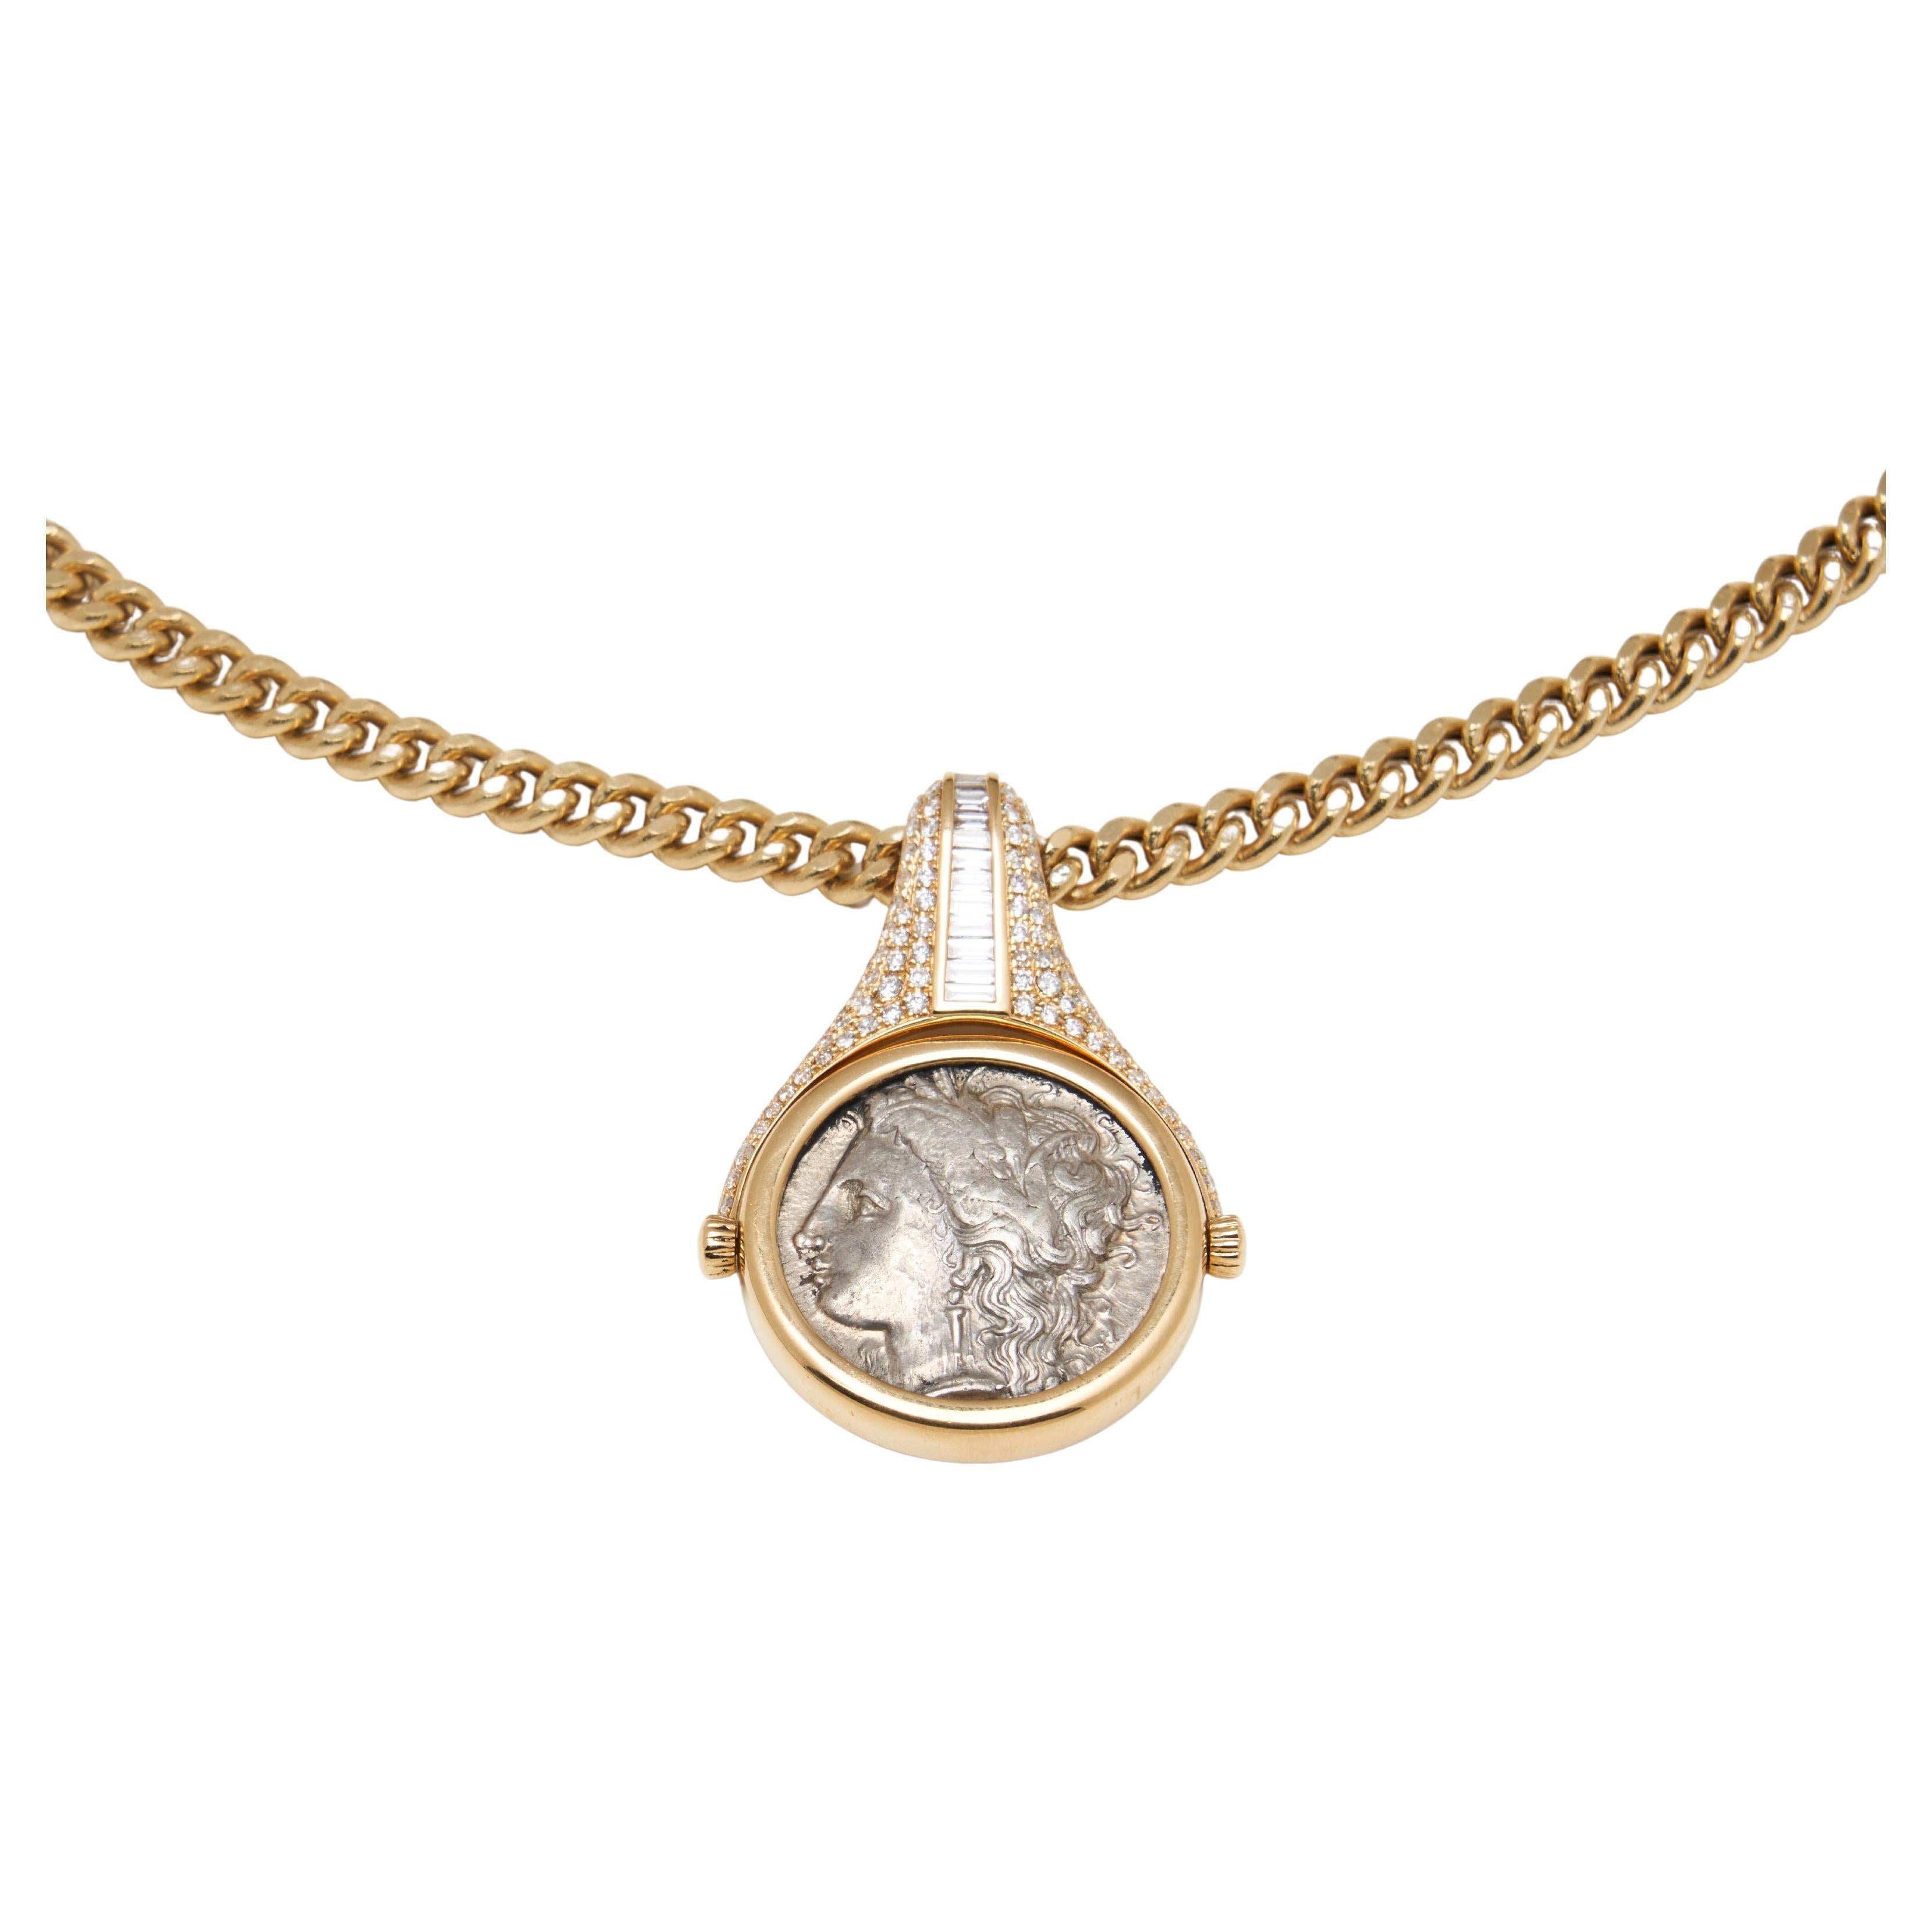 18k Gold Reversible Demeter Coin Necklace with Diamonds